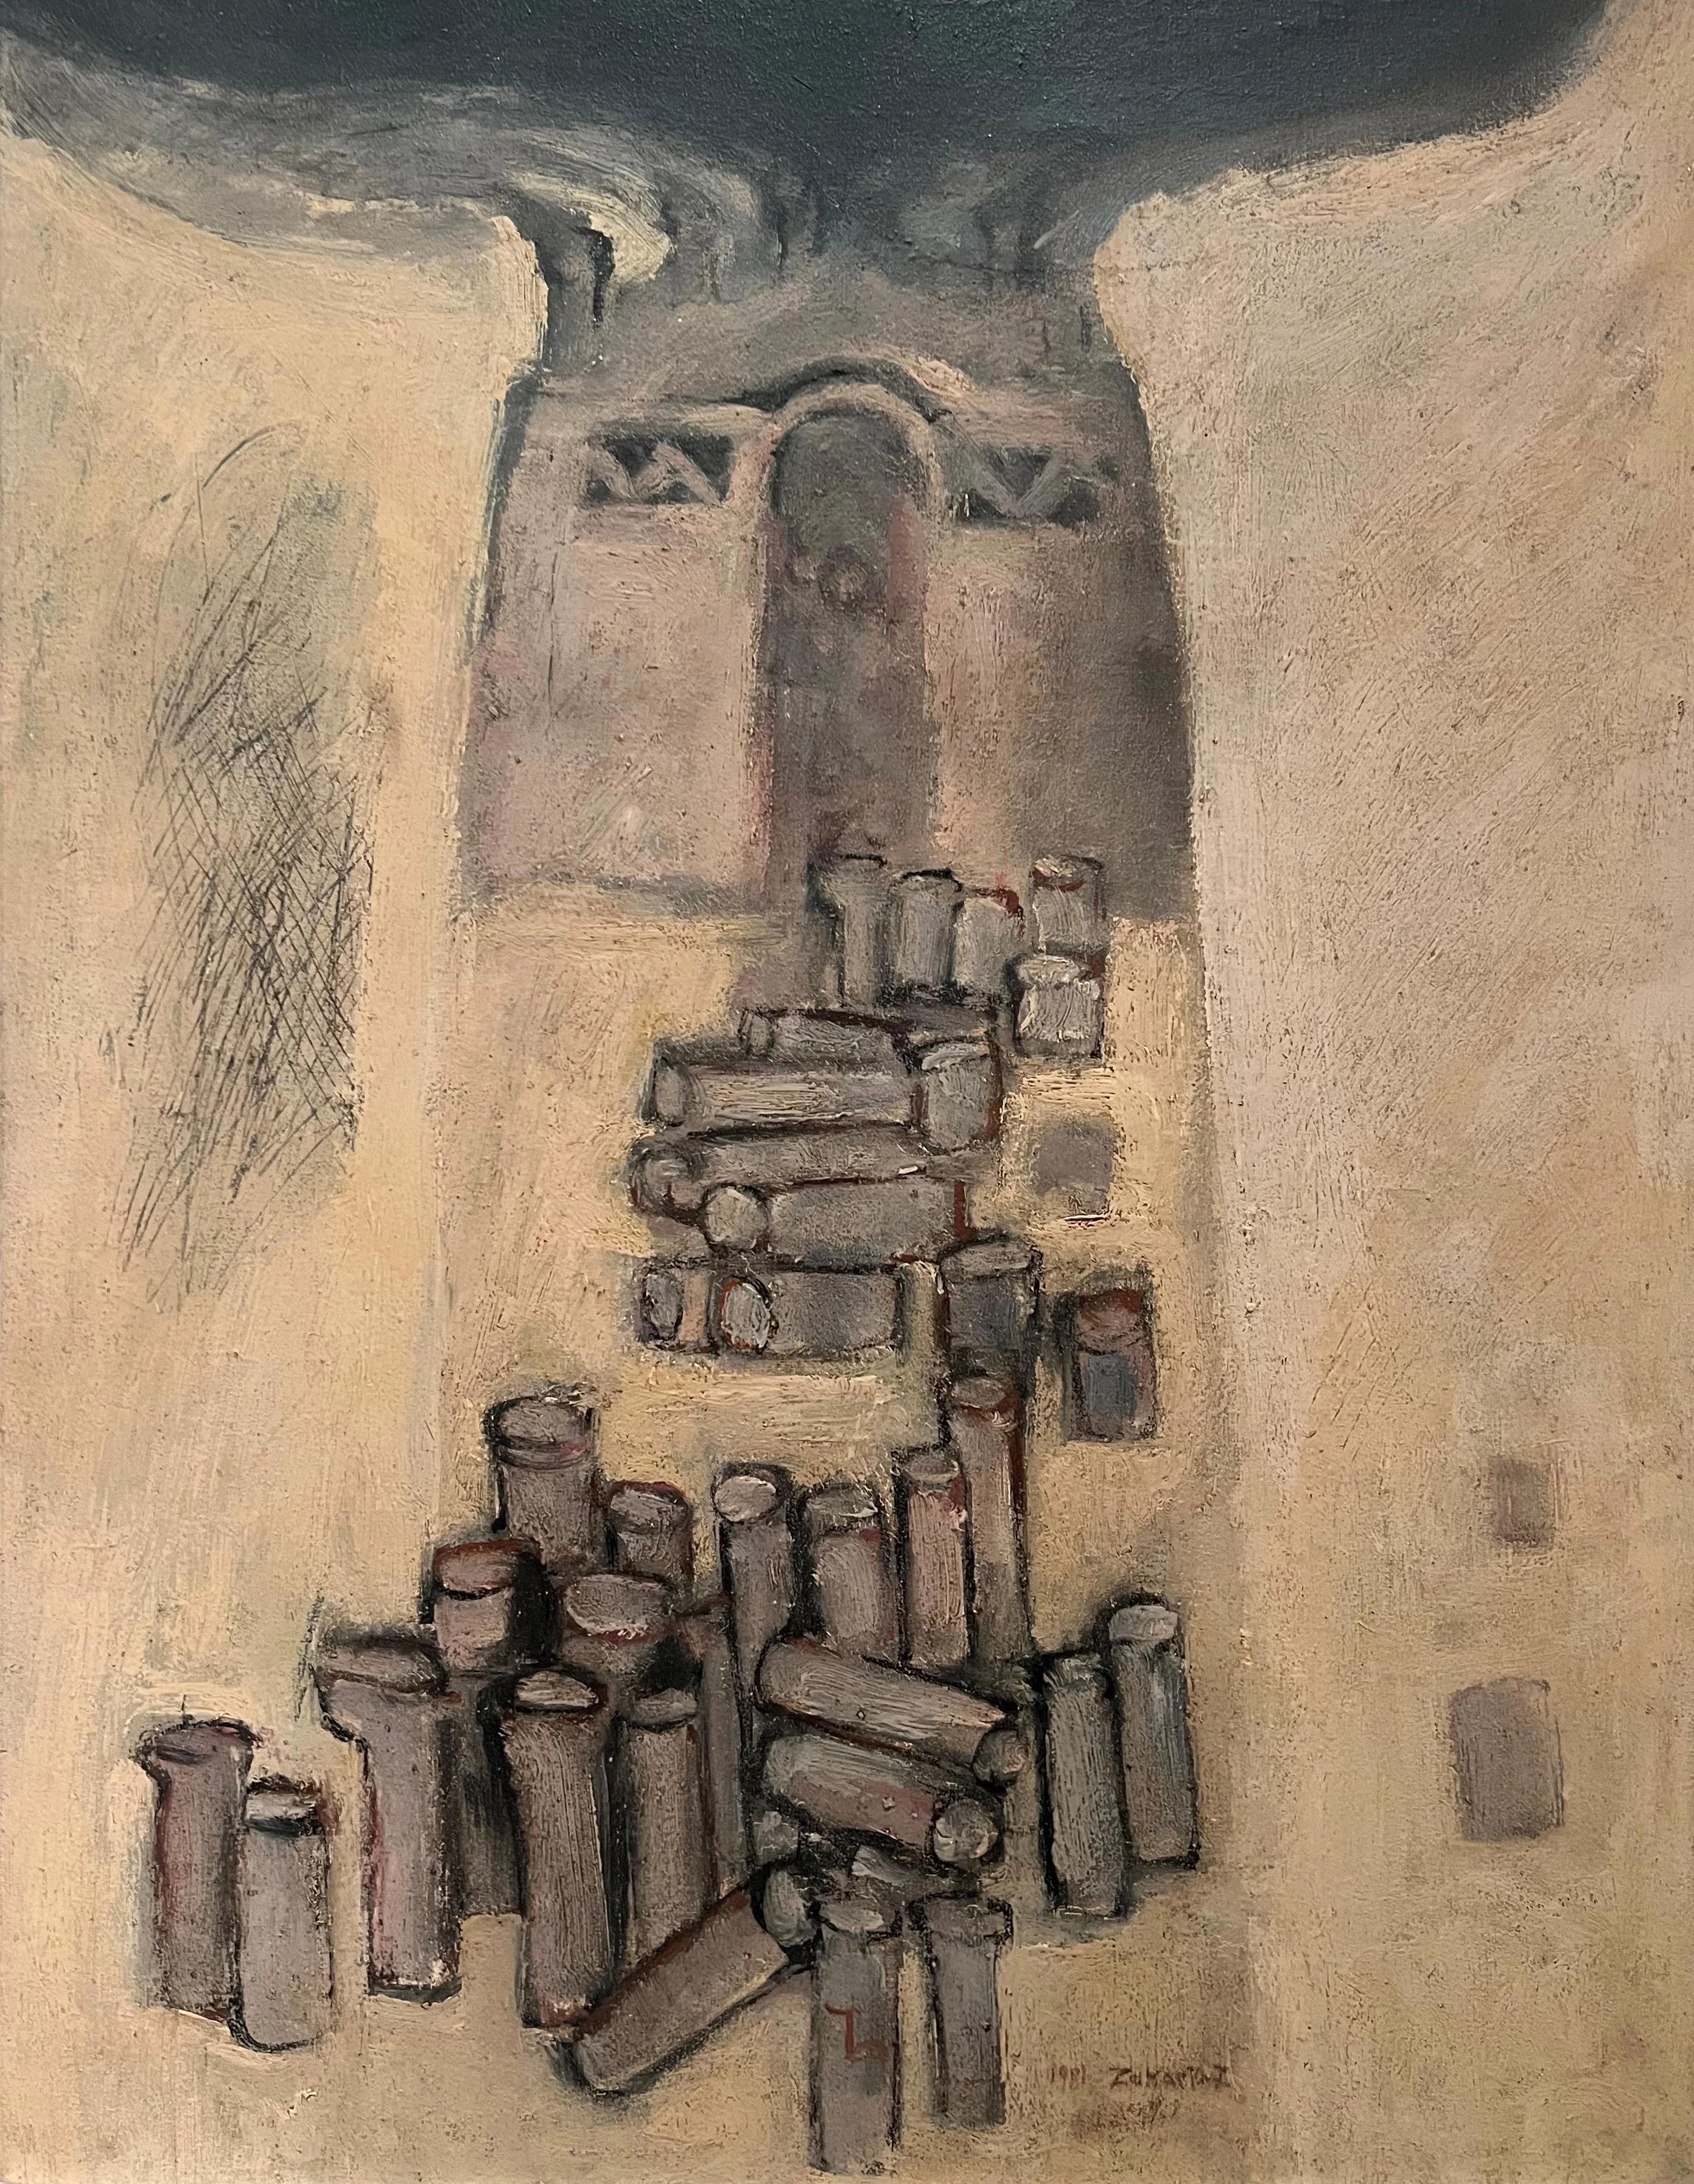 "Kiln" Abstract Oil Painting 26" x 20" inch (1981) by Zaccaria Zeini

Medium: oil on canvas 
Signed and dated 

Zaccaria El Zeini (1932 - 1993) was raised in the popular district of Sayyida Zienab in Old Cairo and graduated from the Faculty of Fine